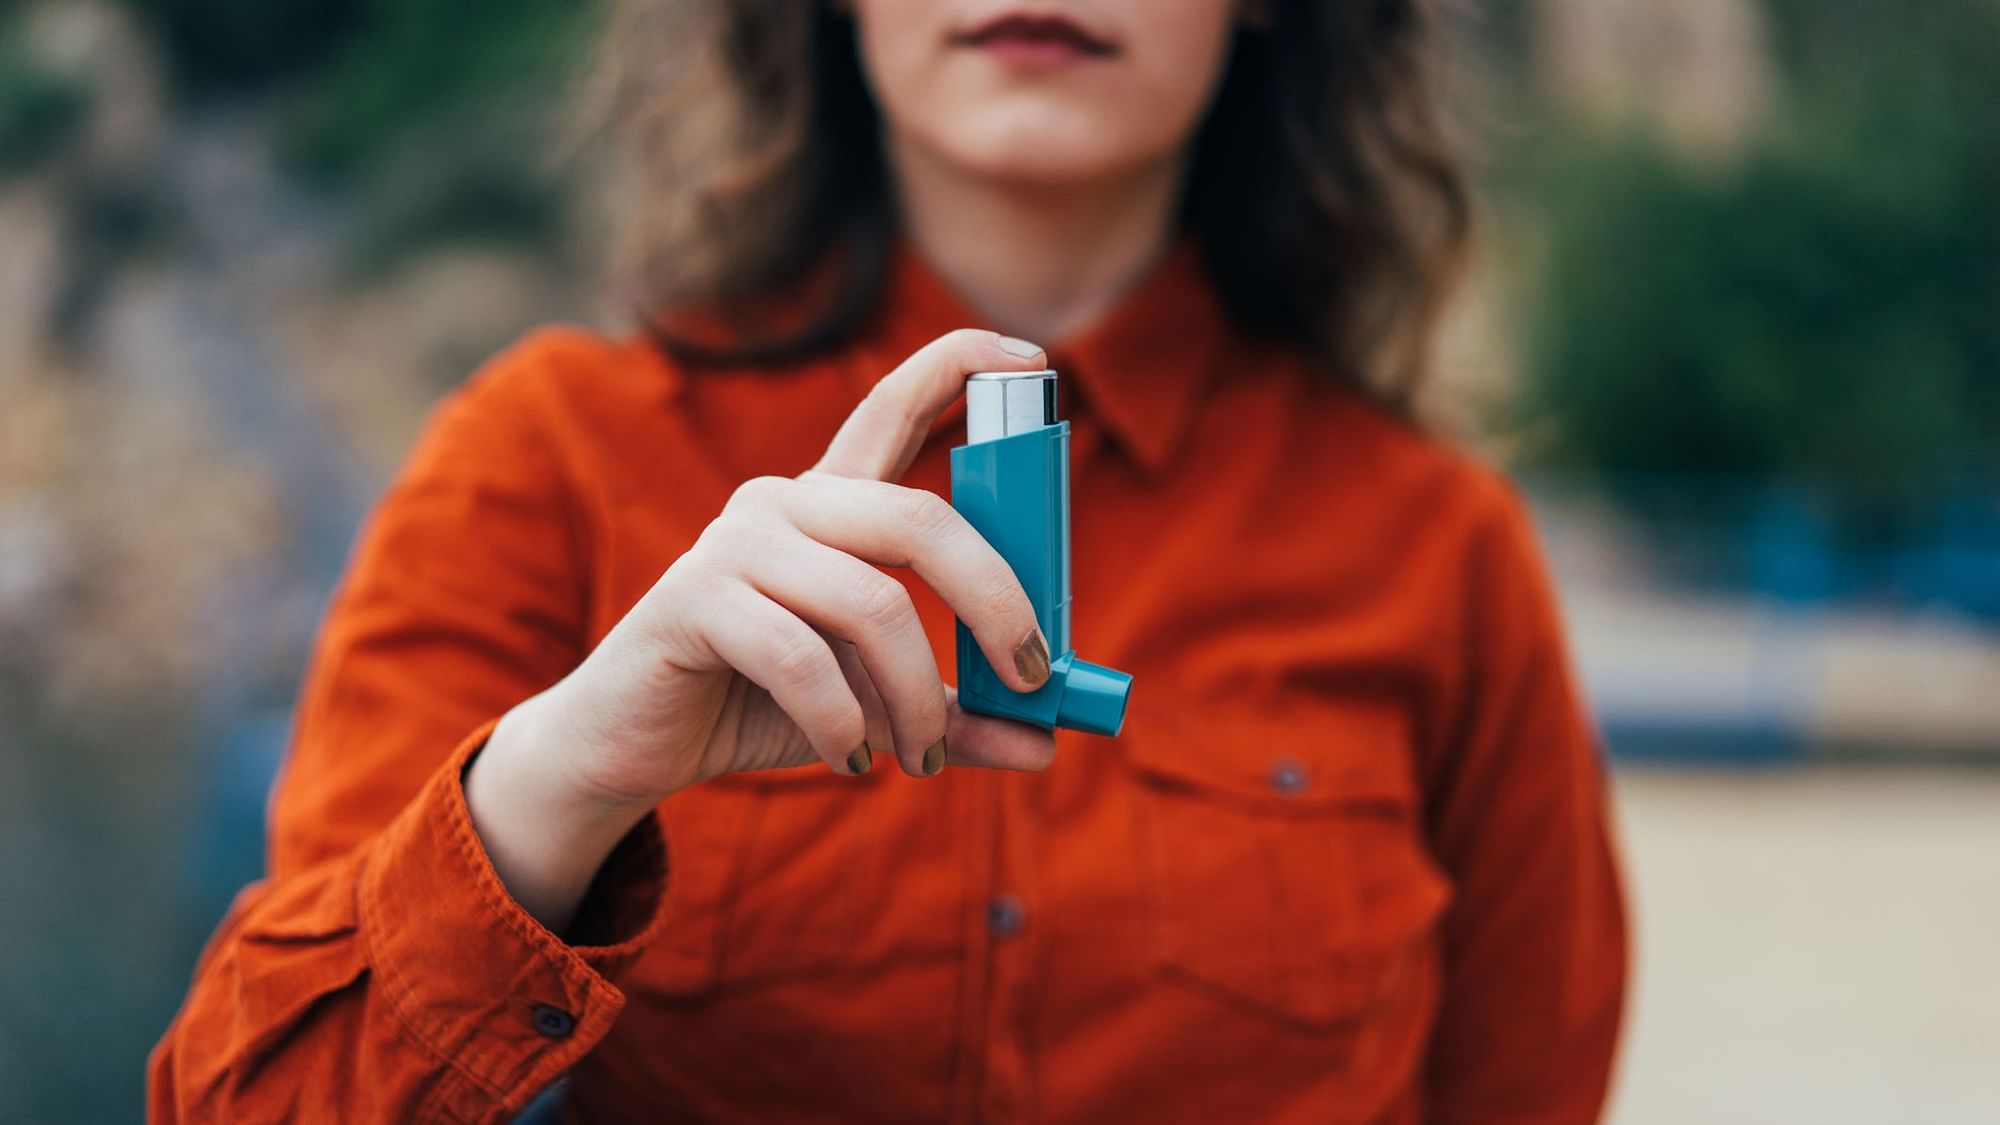 Study suggests switching to ‘green’ inhalers to reduce carbon footprint and medical expense.